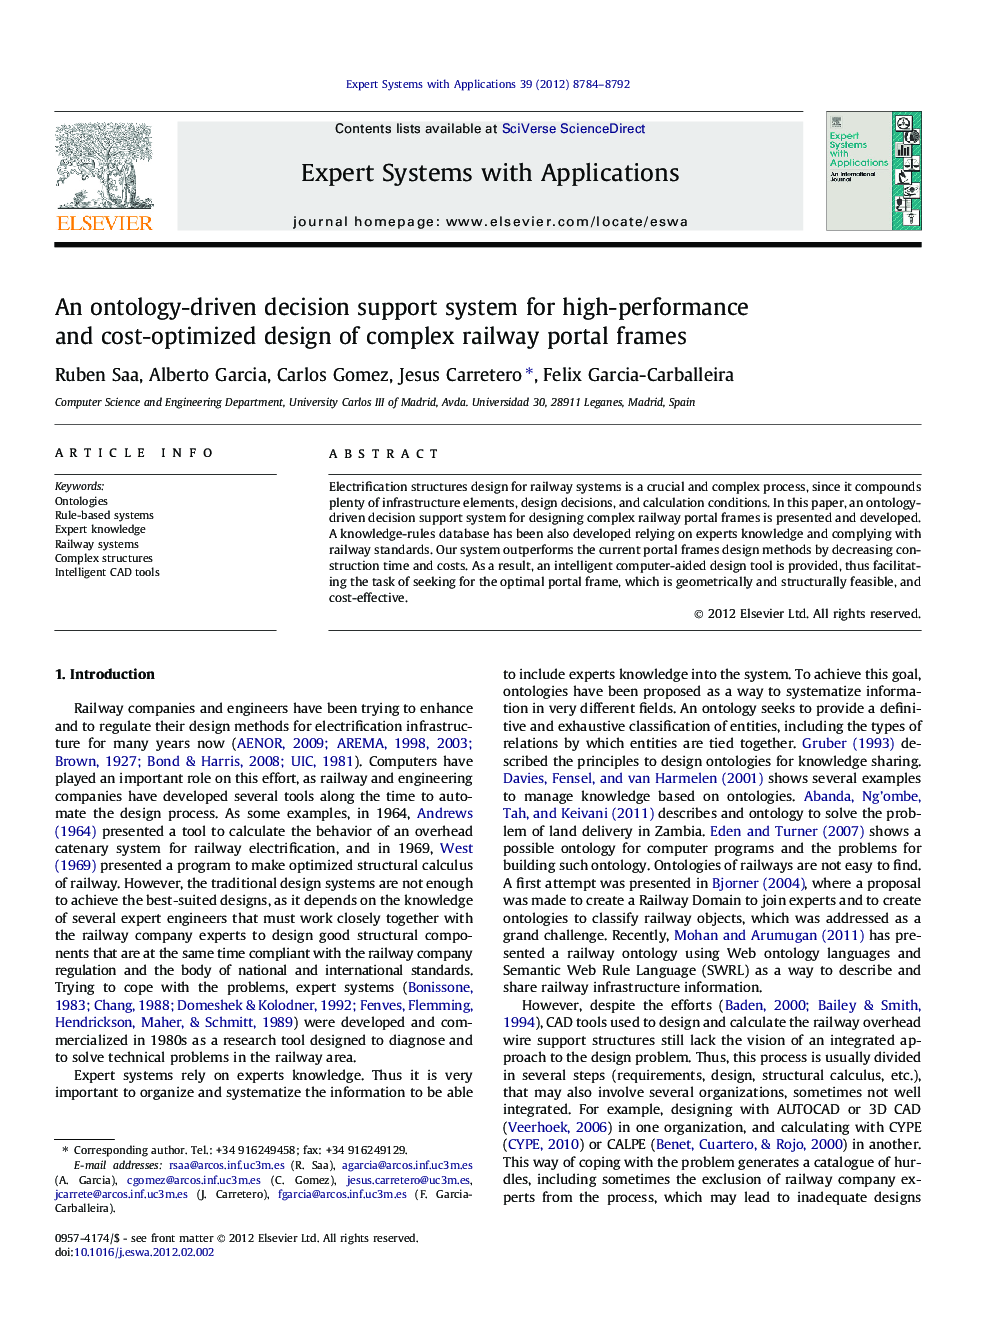 An ontology-driven decision support system for high-performance and cost-optimized design of complex railway portal frames